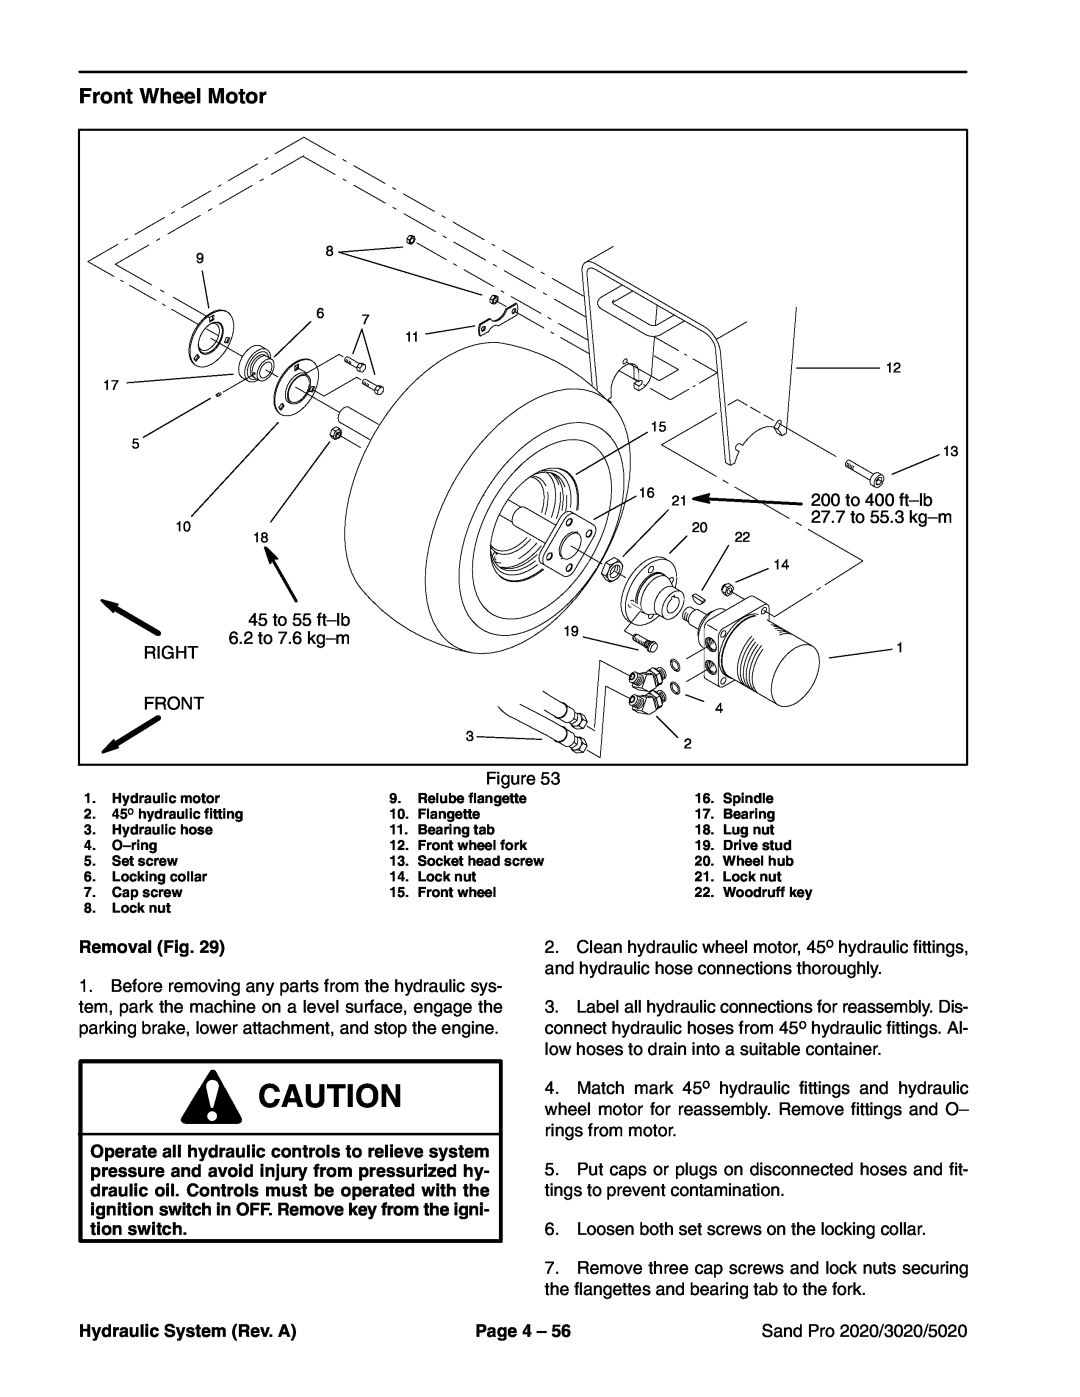 Toro service manual Front Wheel Motor, Removal Fig, Hydraulic System Rev. A, Page 4, Sand Pro 2020/3020/5020 